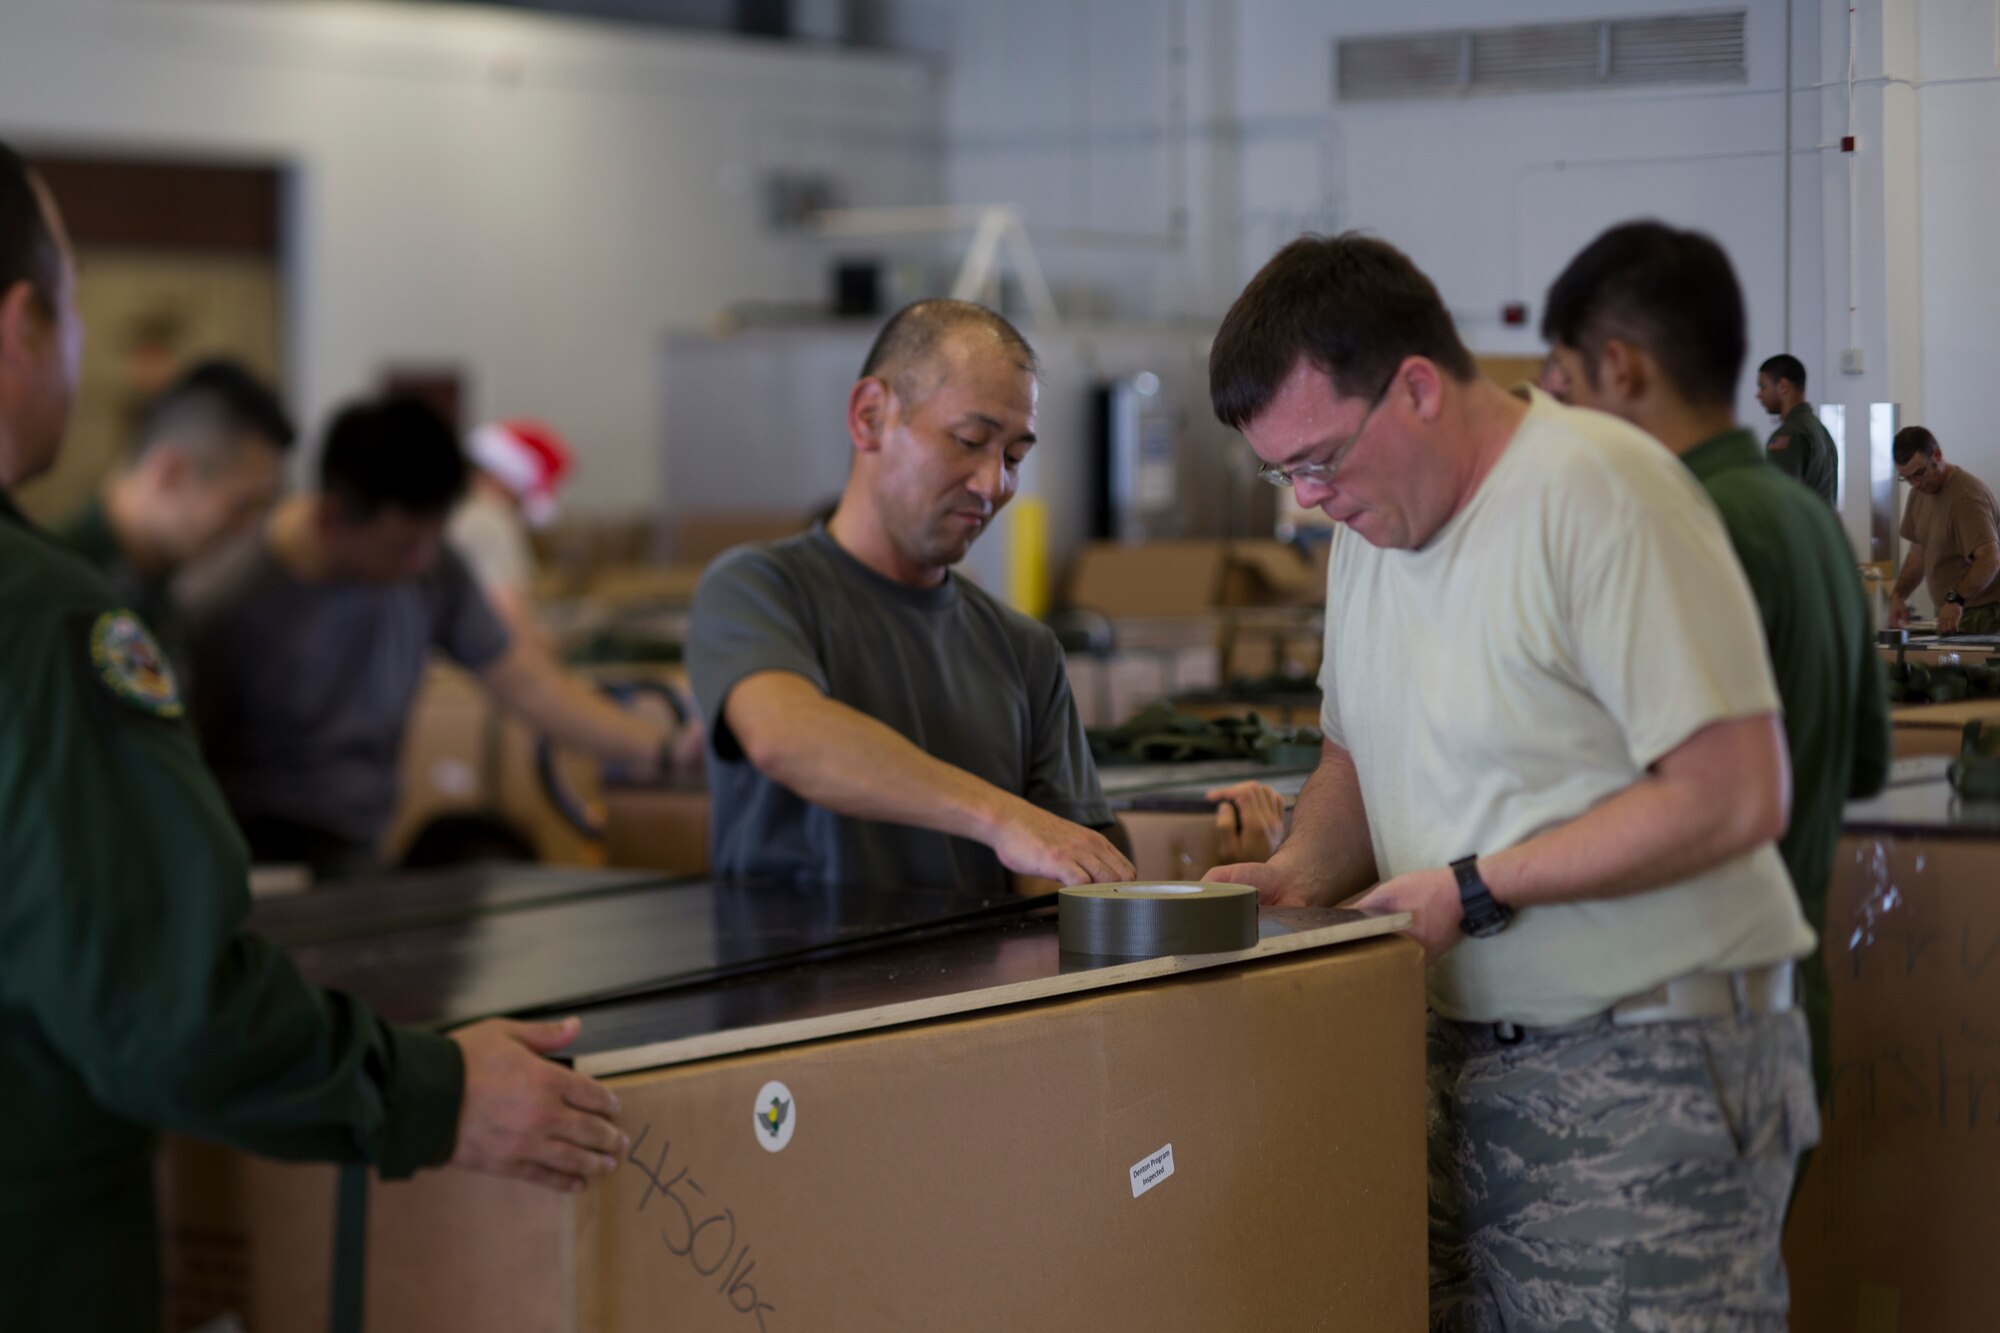 (Left to right) Japan Air Self-Defense Force Master Sgt. Atsushi Tanigawa, 3rd Tactical Airlift Wing, and U.S. Air Force Master Sgt. Zach Kirby, 36th Airlift Squadron flight engineer, build a low-cost, low-altitude bundle destined for the island of Fais, during Operation Christmas Drop at Andersen Air Force Base, Guam, Dec. 5, 2015. Operation Christmas Drop 2015 will be the first ever trilateral training event that includes additional air support from the Japan Air Self-Defense Force and Royal Australian Air Force. (U.S. Air Force photo by Osakabe Yasuo/Released)